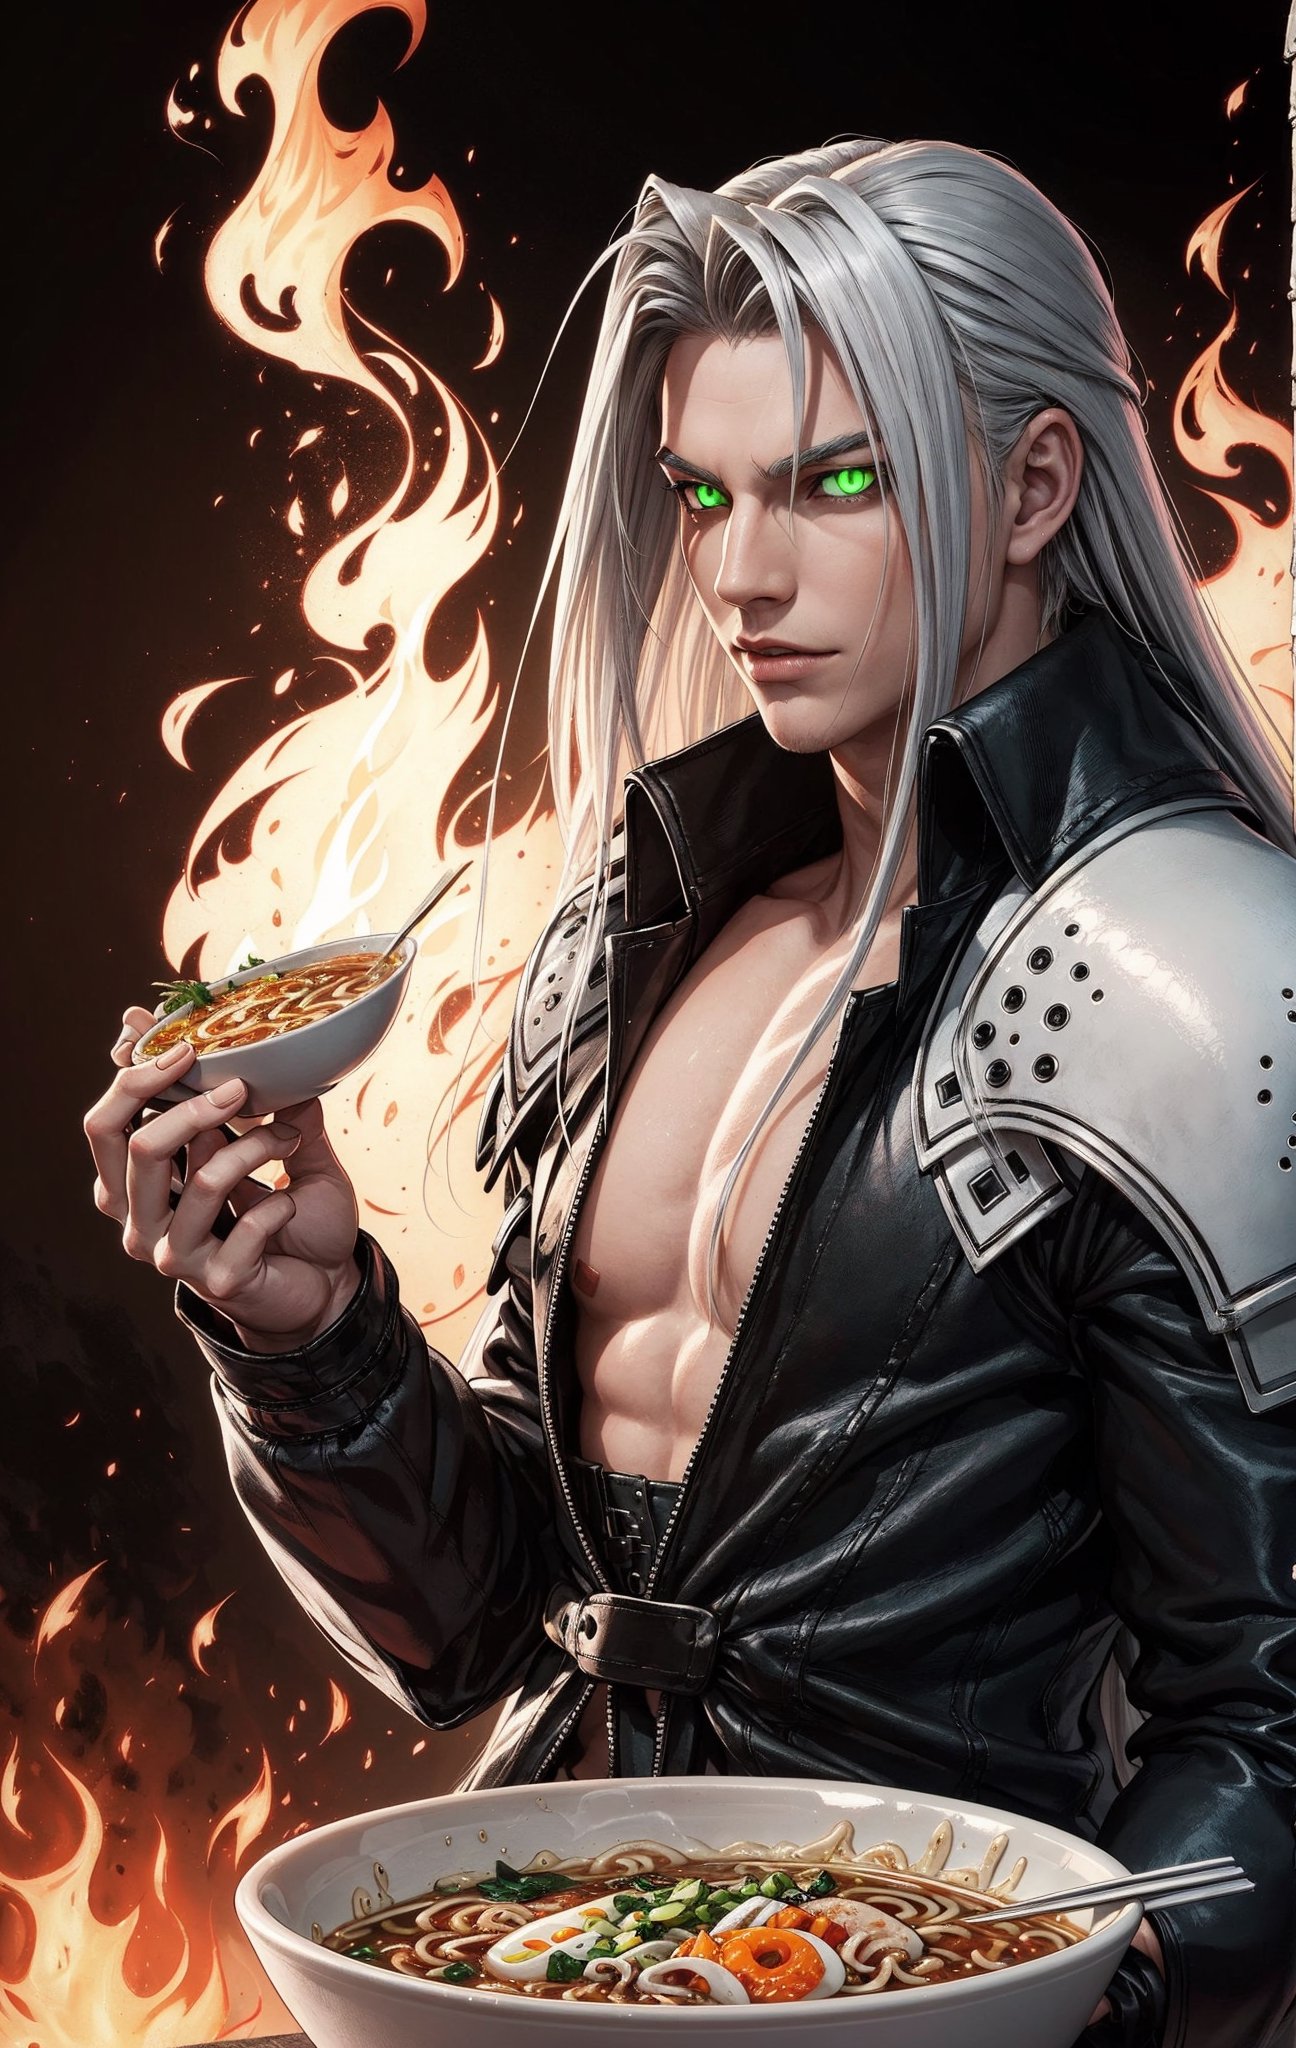 Sephiroth (Final Fantasy),single white wing,one winged angel wing,green glowing eyes,arrogant,manly,confident,eating ramen,dramatic,fire,